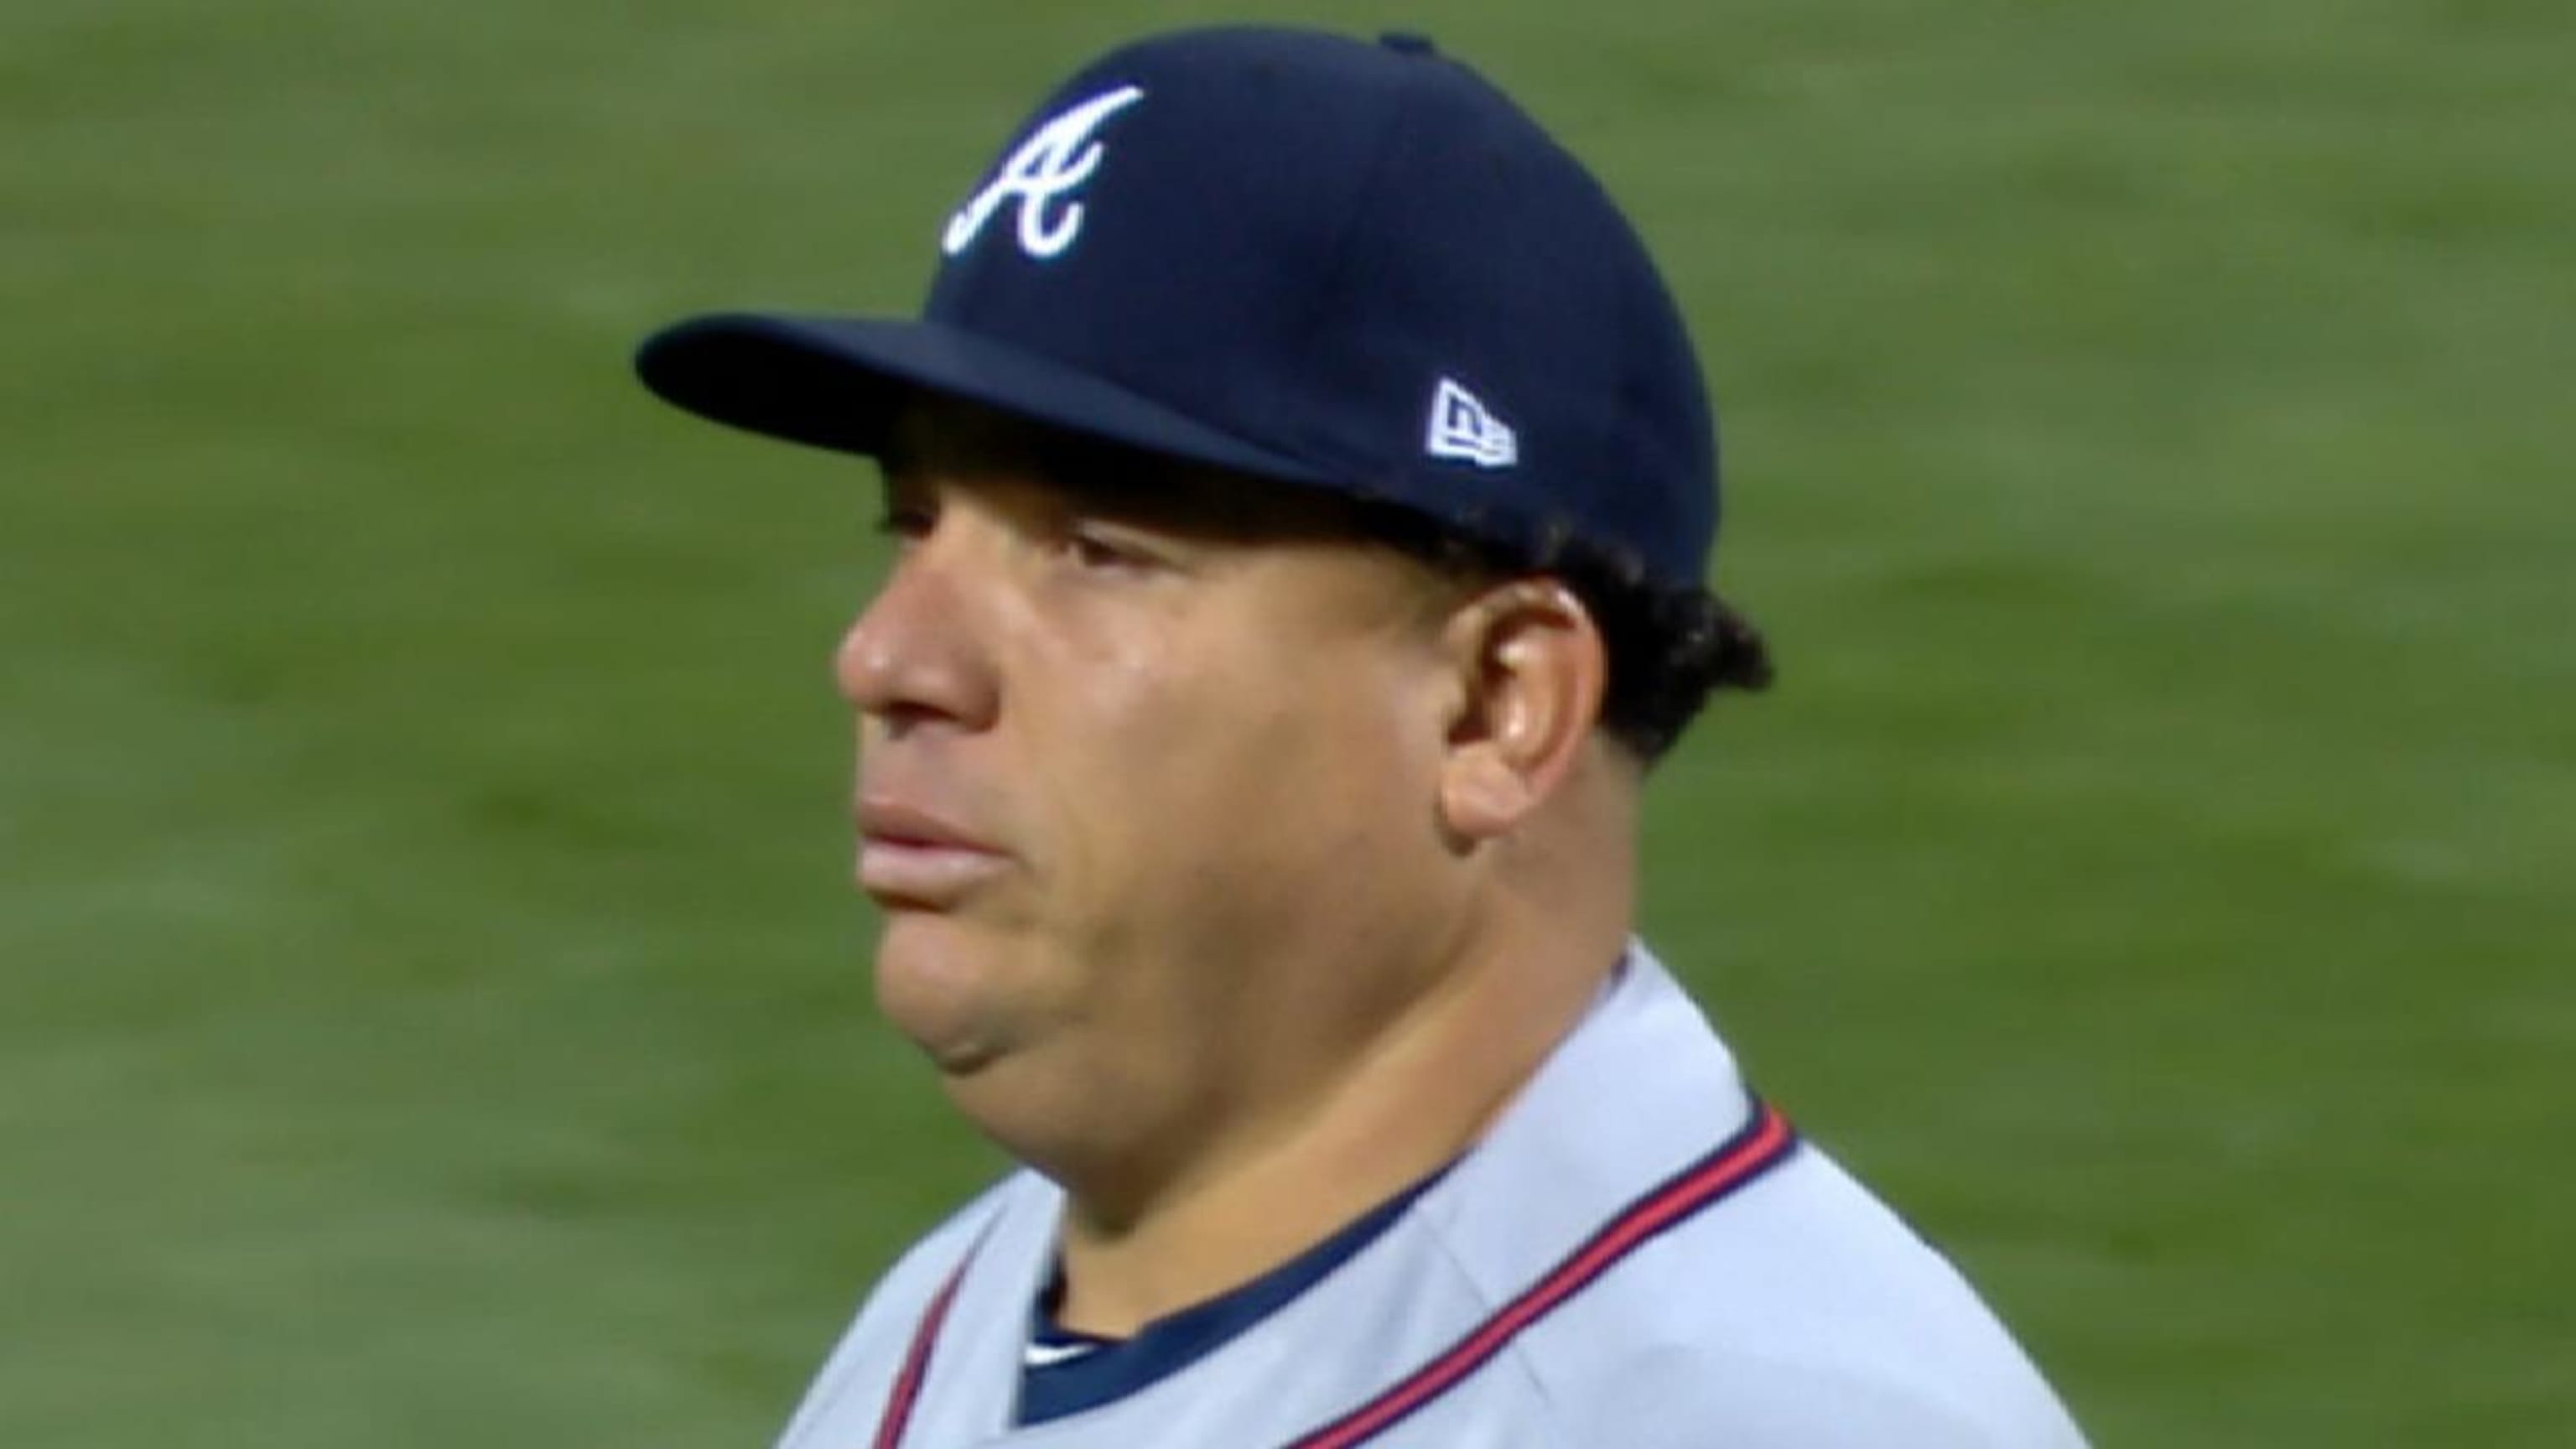 Everyone rejoice! Bartolo Colon signed a Minor League deal with the Rangers